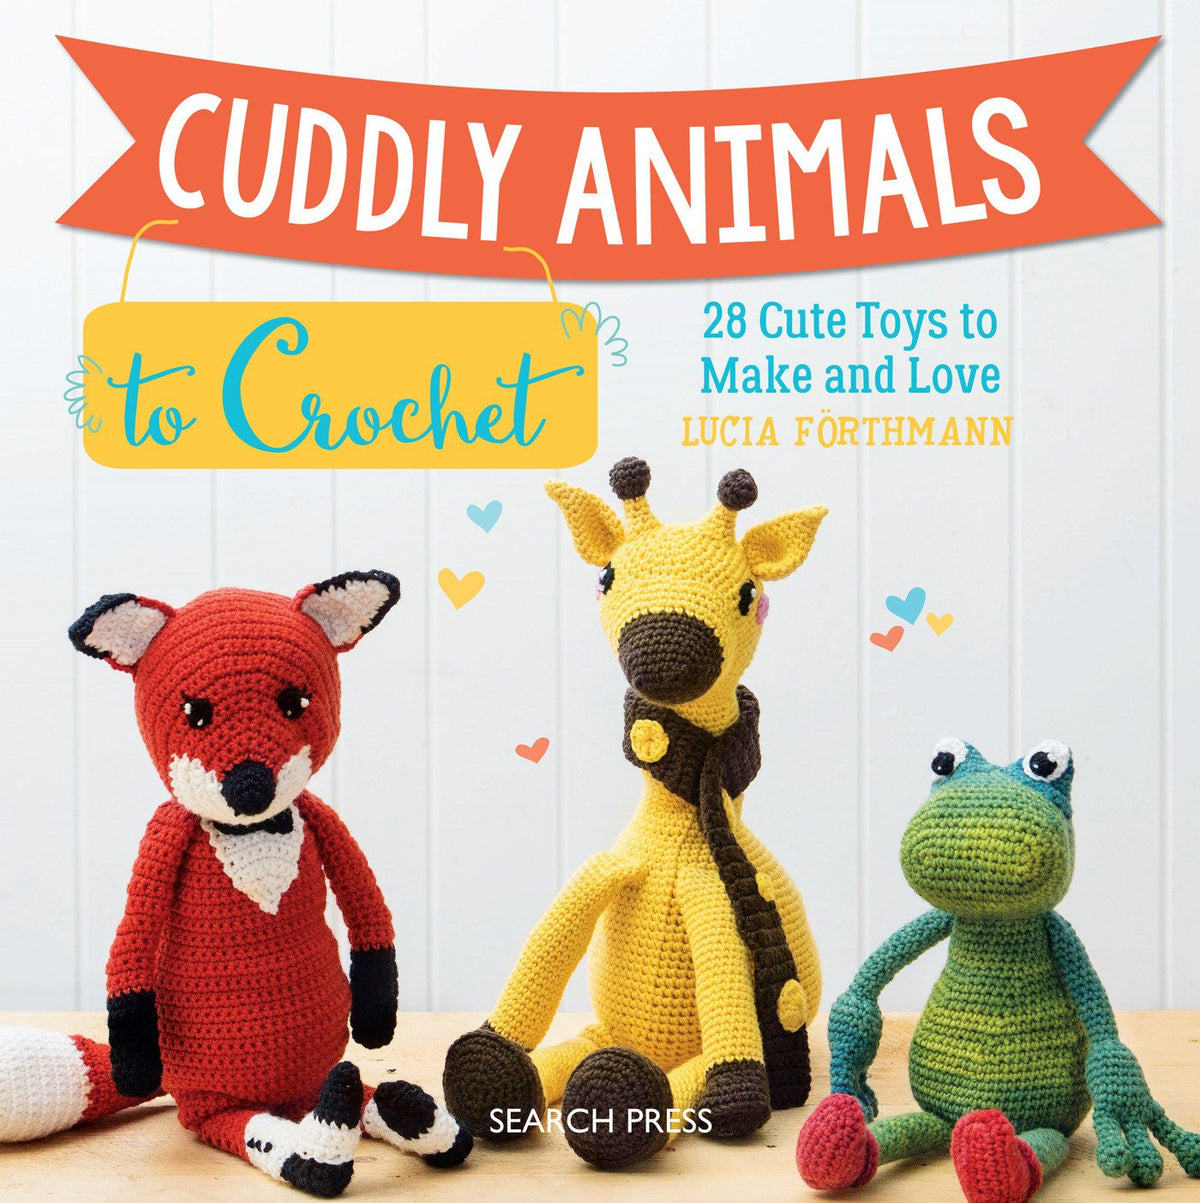  Animal Crochet Book: 8 Cute Animal Patterns and Easy to Do:  Gift Ideas for Holiday eBook : Allen, Tilithia : Kindle Store